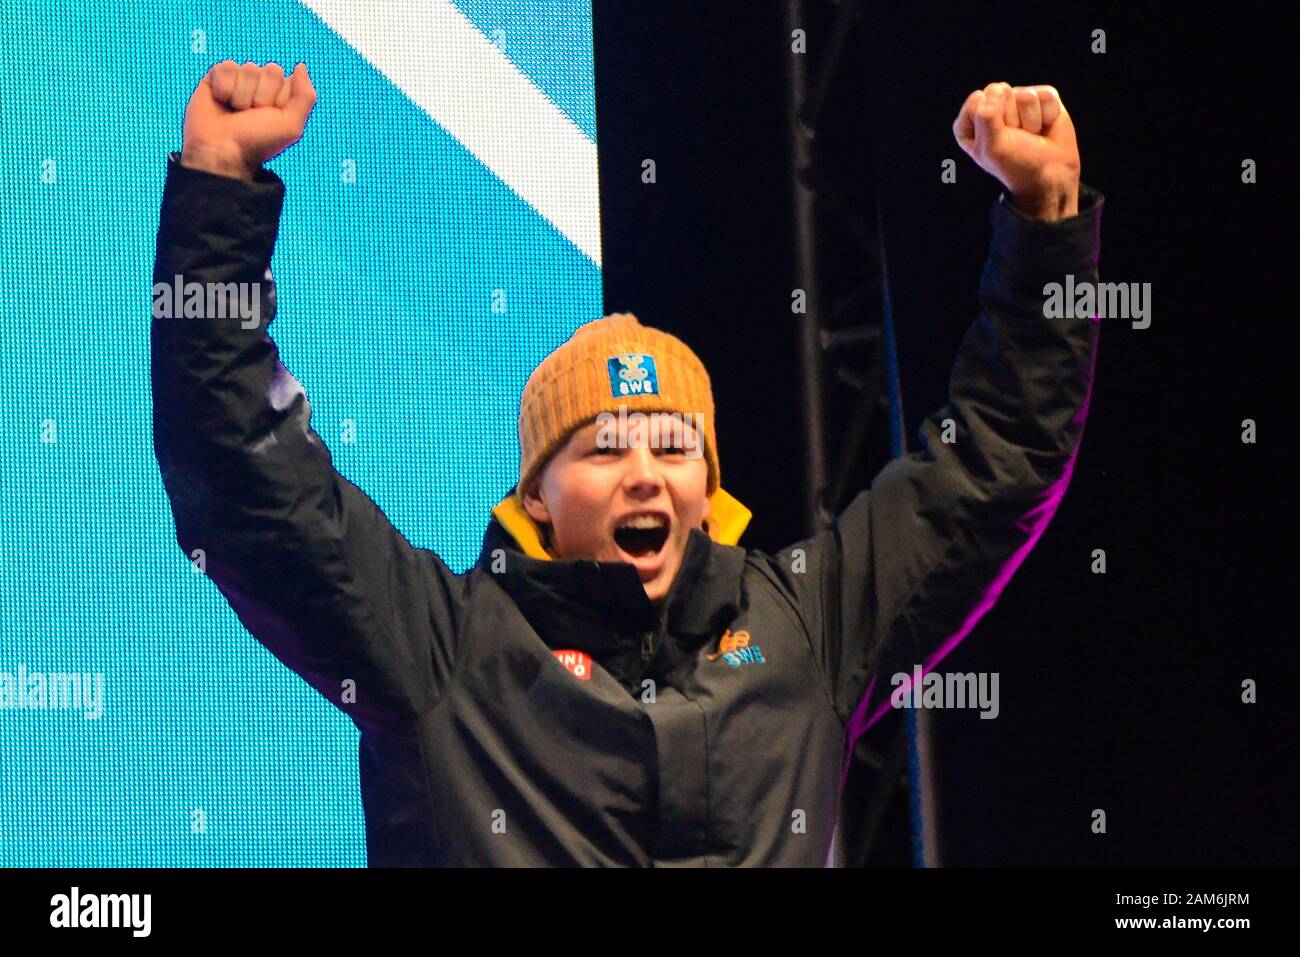 Lausanne, Switzerland. 11th Jan, 2020. Adam Hofstedt of Sweden celebrates getting the bronze medal from the Alpine Men's Combined Slalom event in the 2020 Winter Youth Olympic Games in Lausanne Switzerland. Credit: Christopher Levy/ZUMA Wire/Alamy Live News Stock Photo